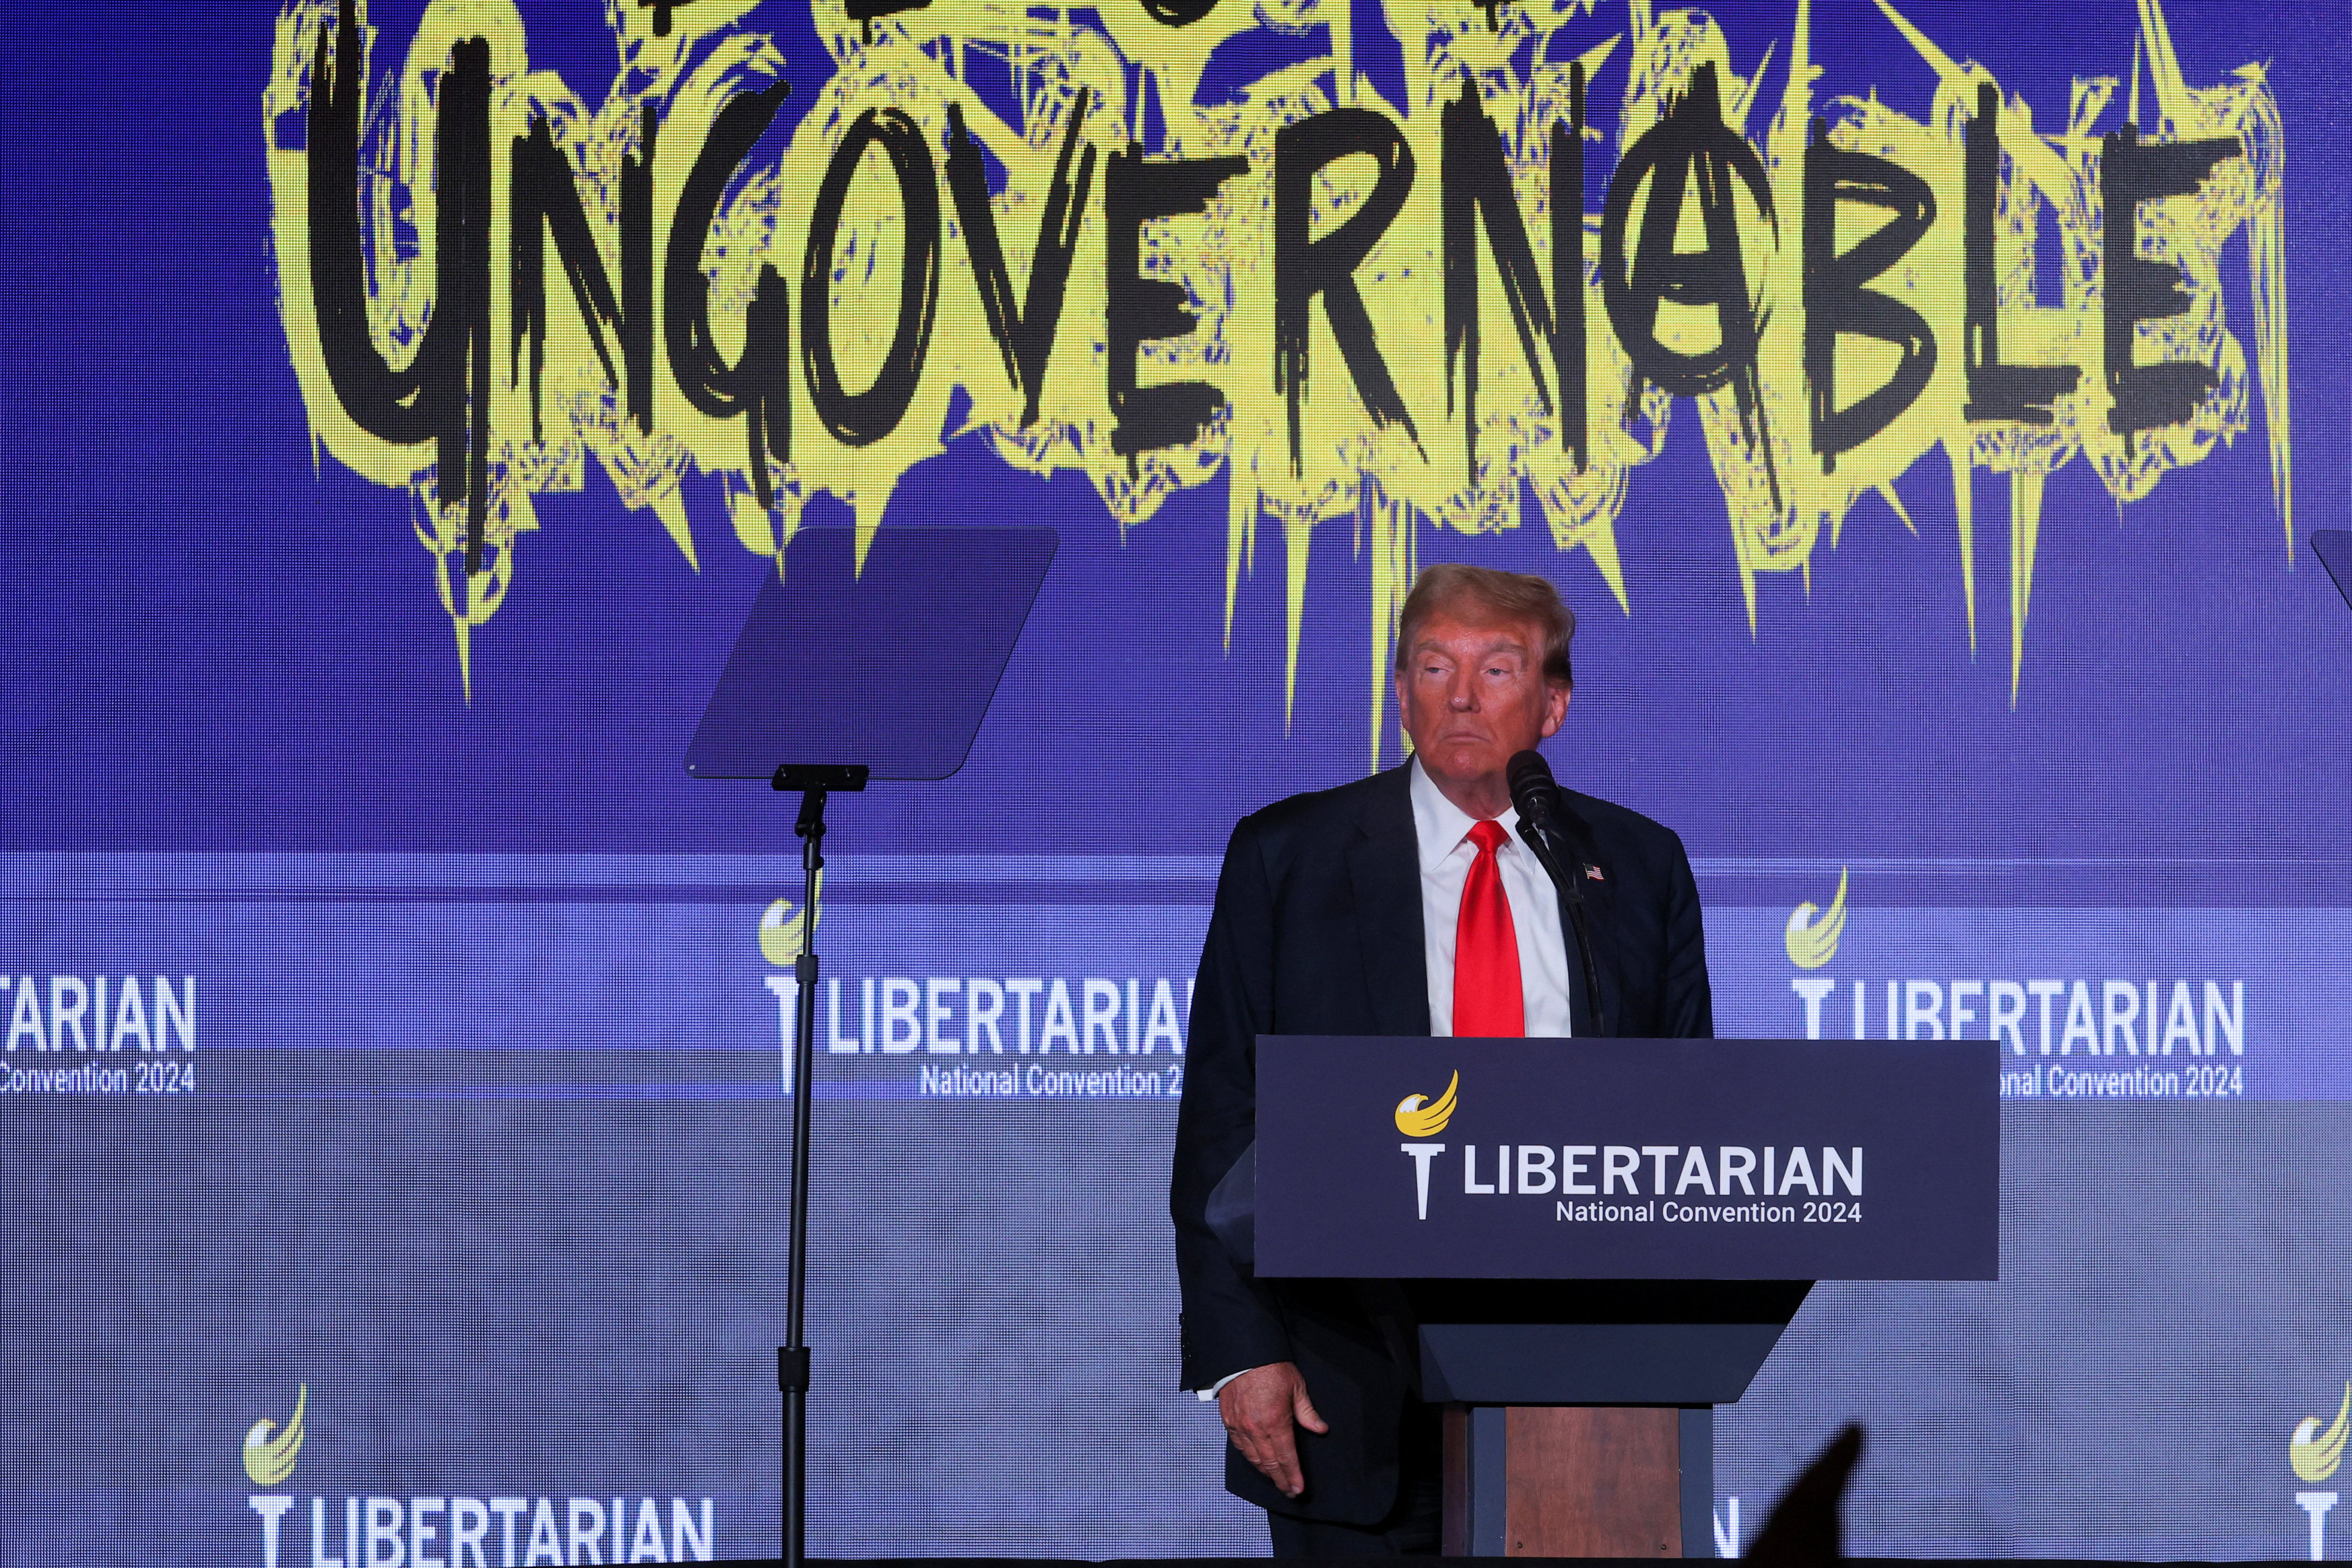 Former US President and Republican presidential candidate Donald Trump was booed repeatedly while addressing the Libertarian Party National Convention on Saturday. Photo: Reuters